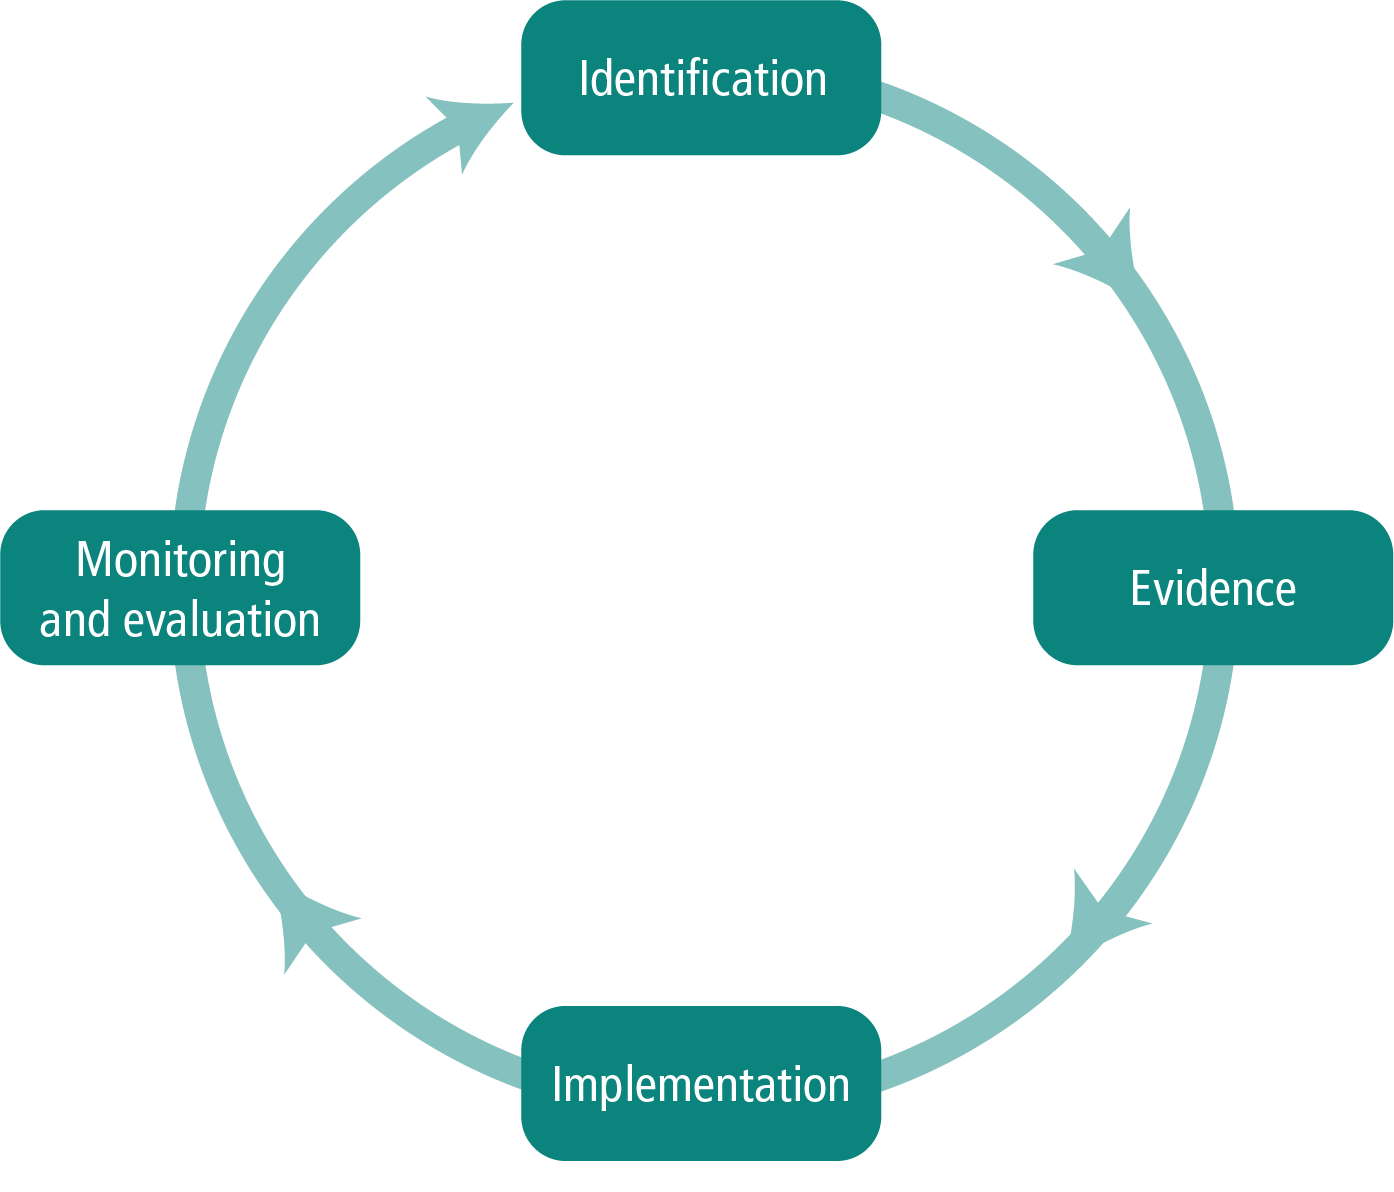 Cyclical diagram demonstrating the continuous process of identification, evidence, implementation, and monitoring and evaluation